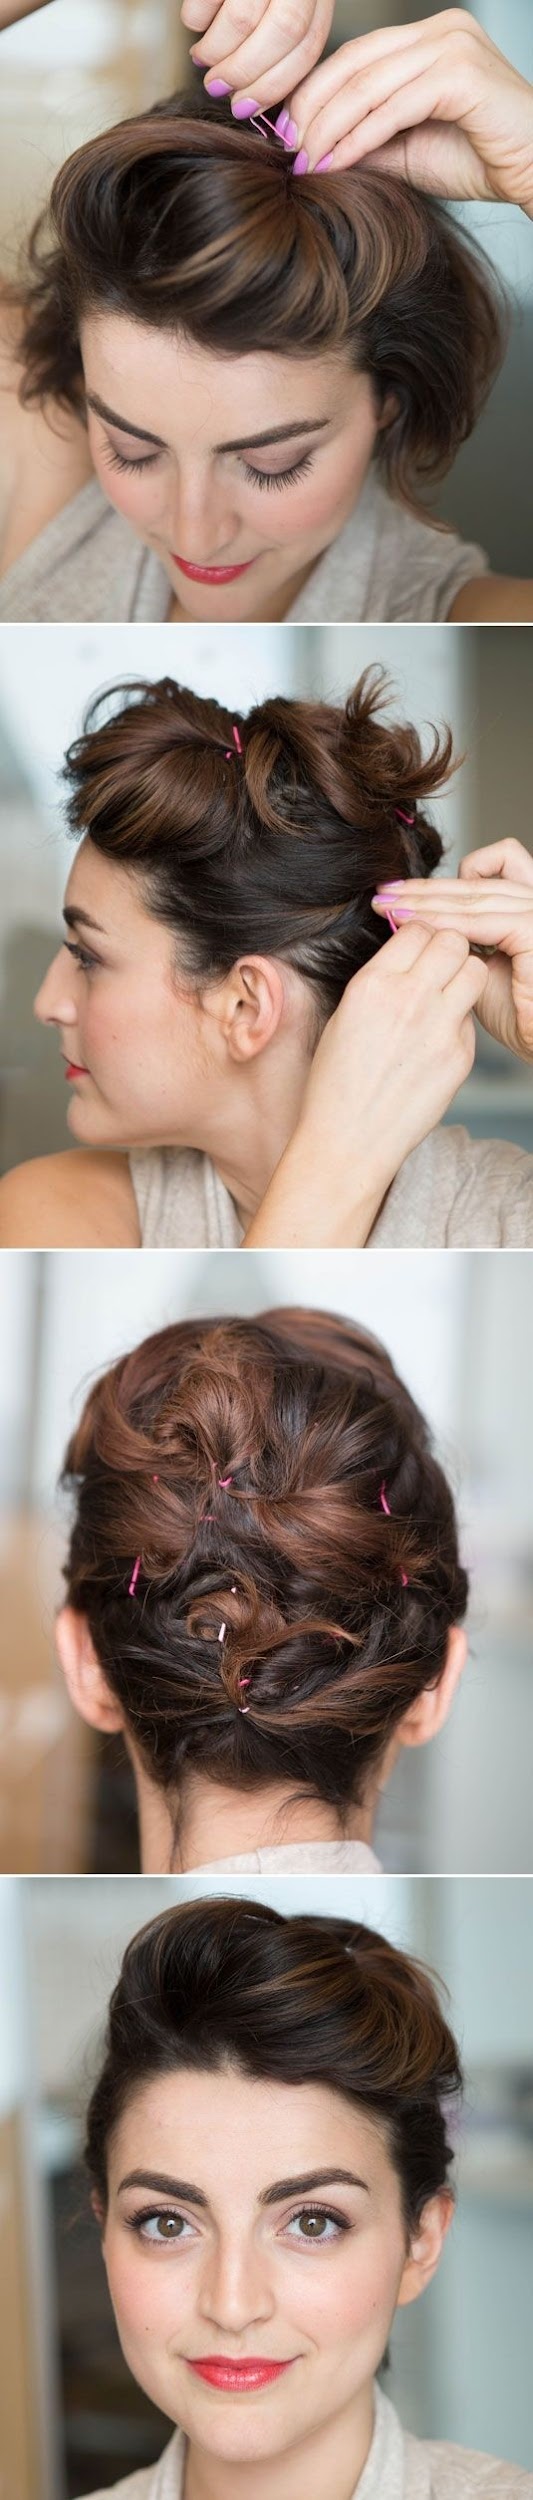 Updo Hairstyle Ideas for Short Hair